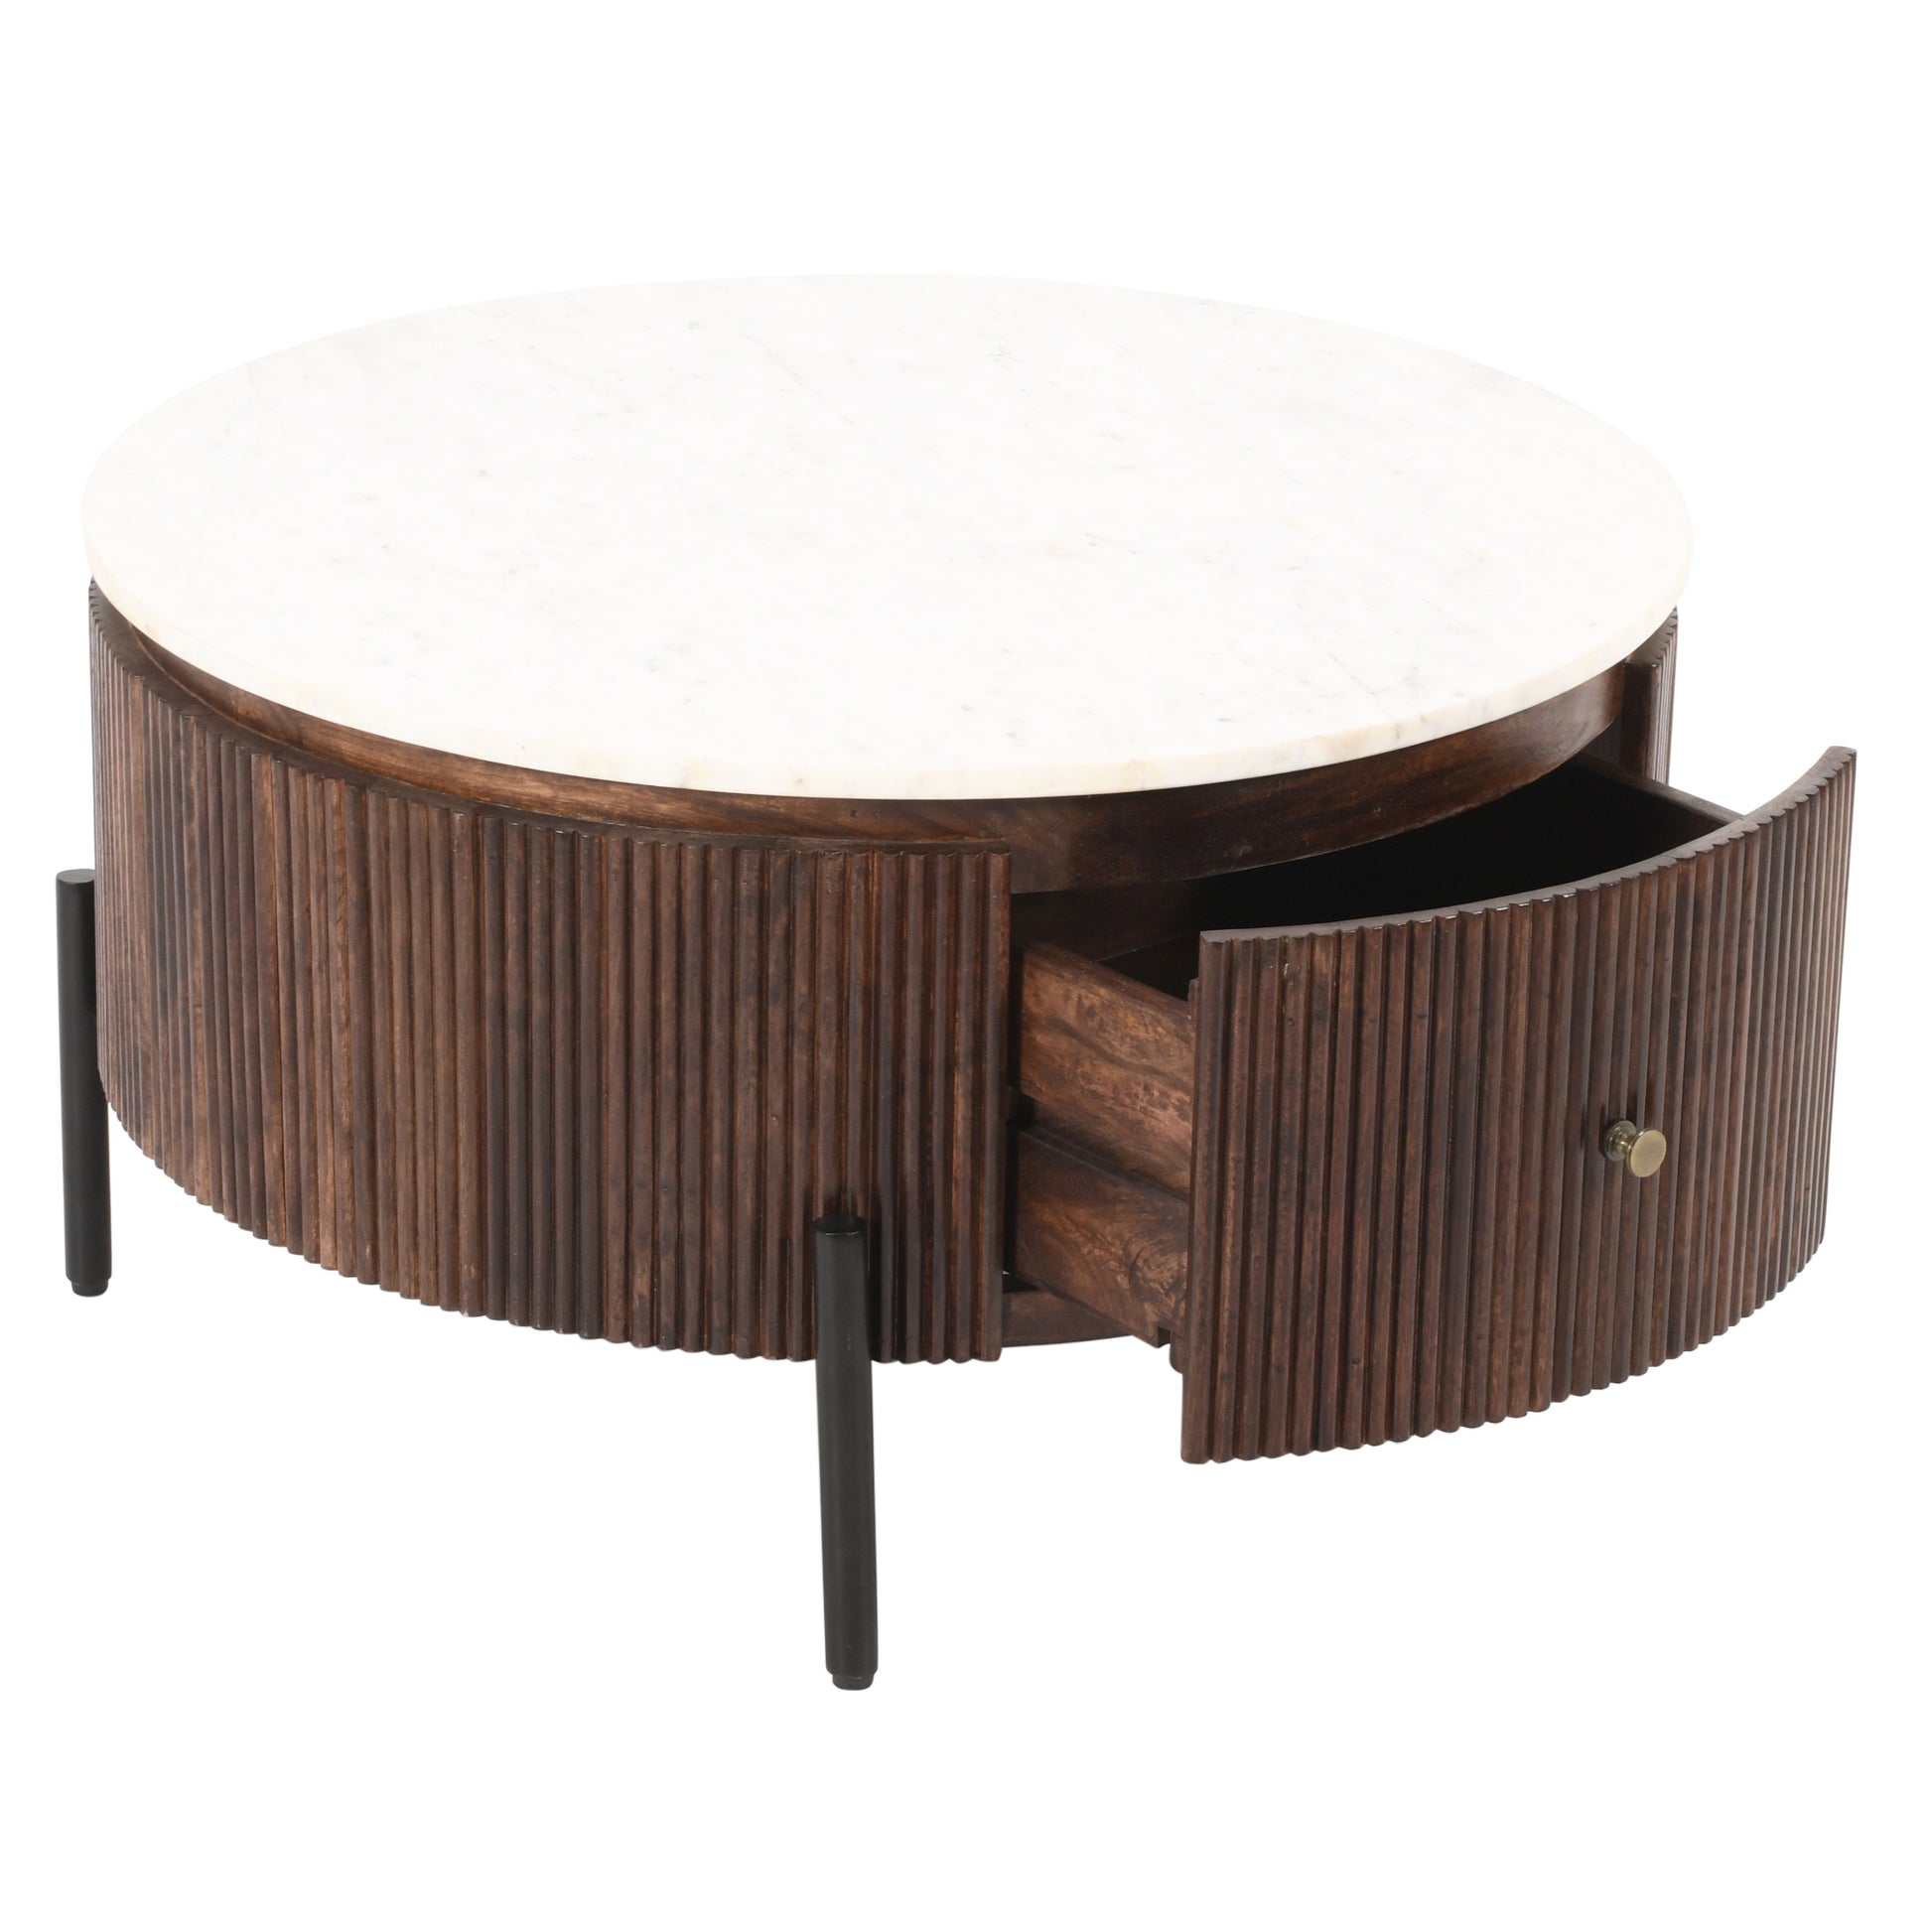 Opal Mango Wood Round Fluted Coffee Table With Marble Top & Metal Legs